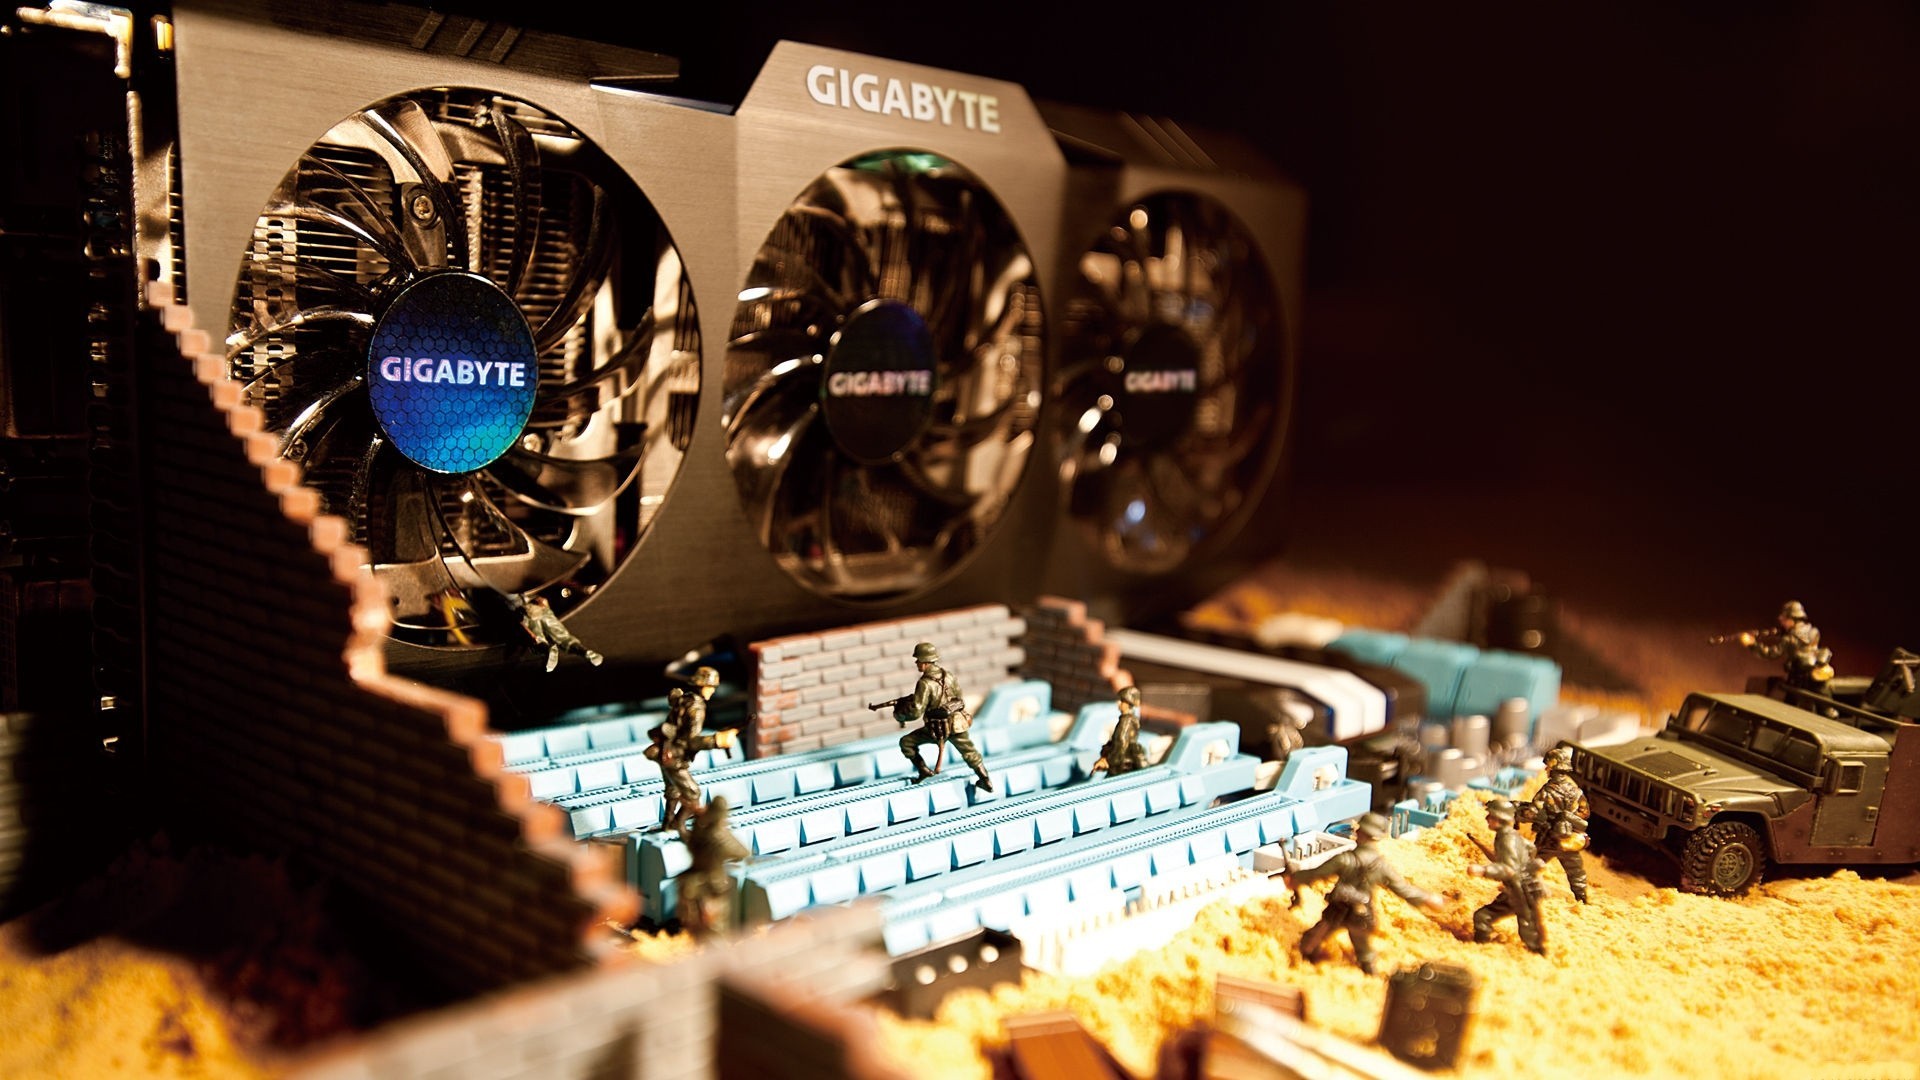 1920x1080 Search Results for “wallpaper gigabyte motherboard” – Adorable Wallpapers